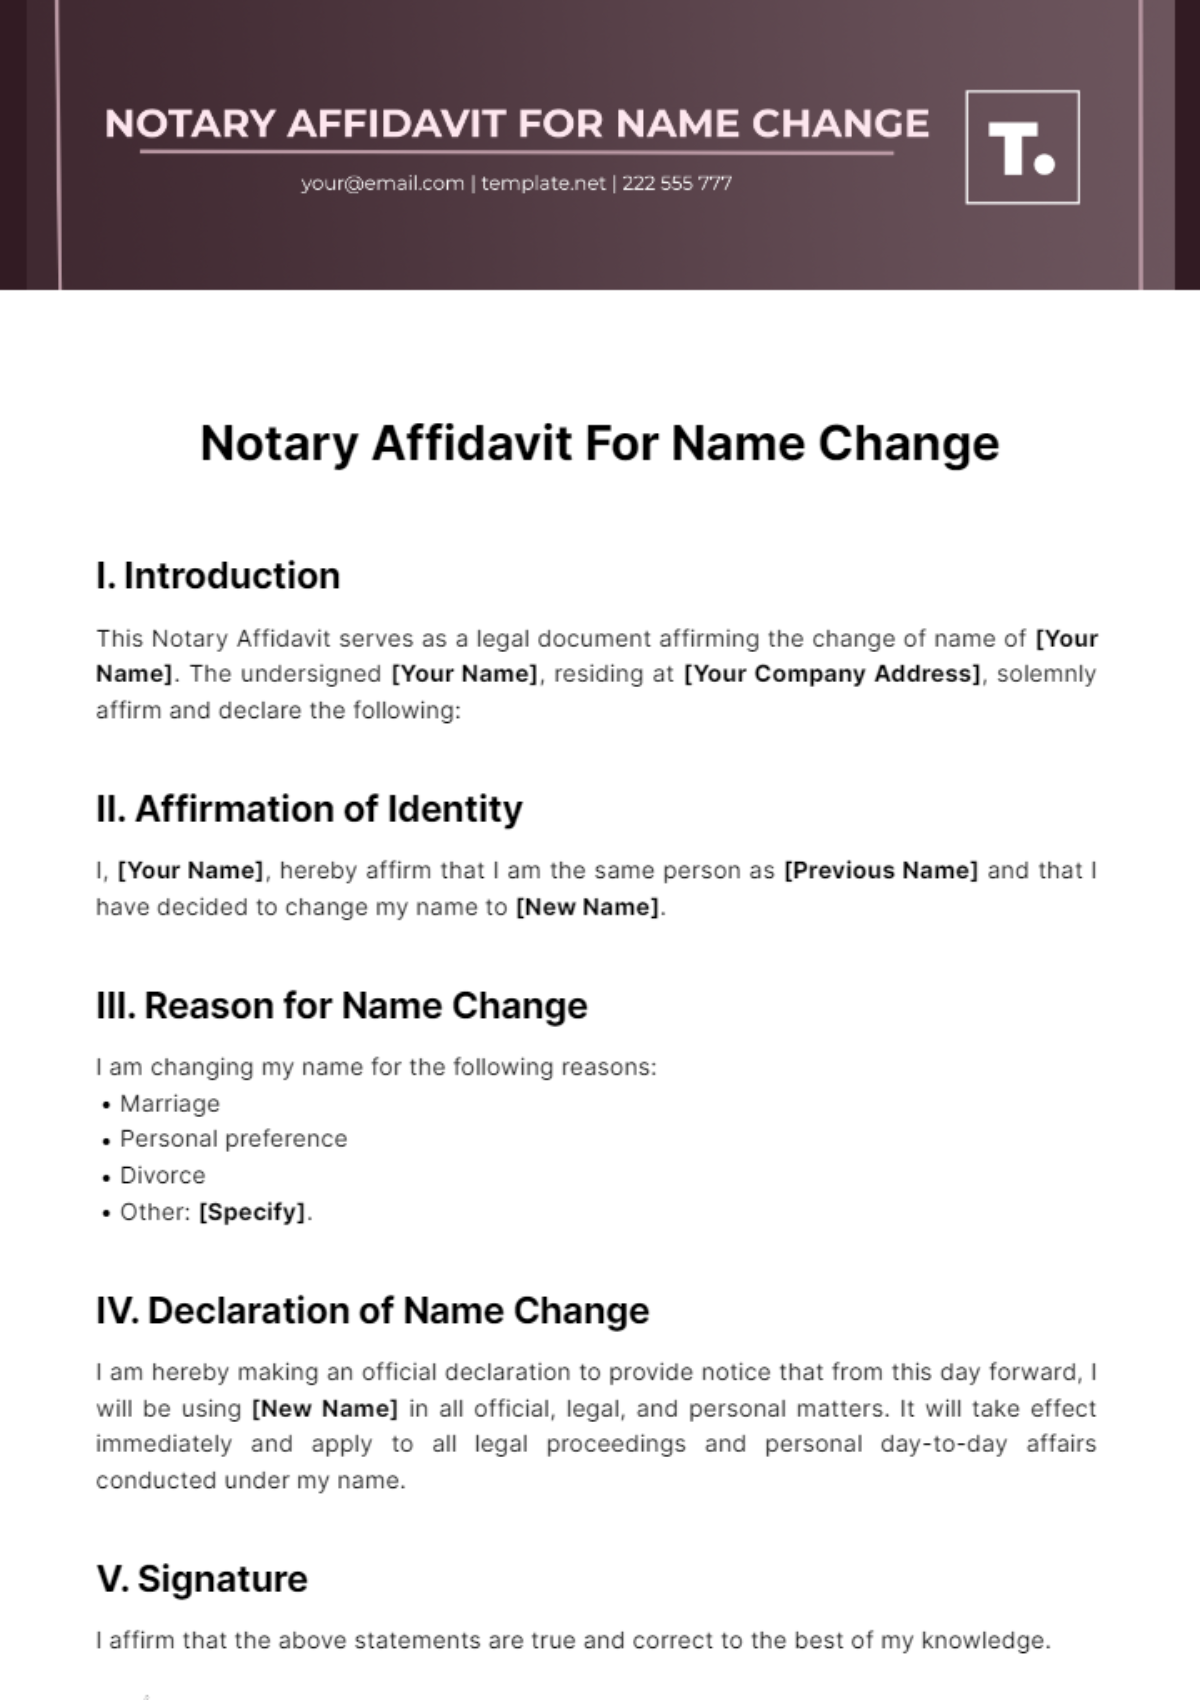 Free Notary Affidavit For Name Change Template